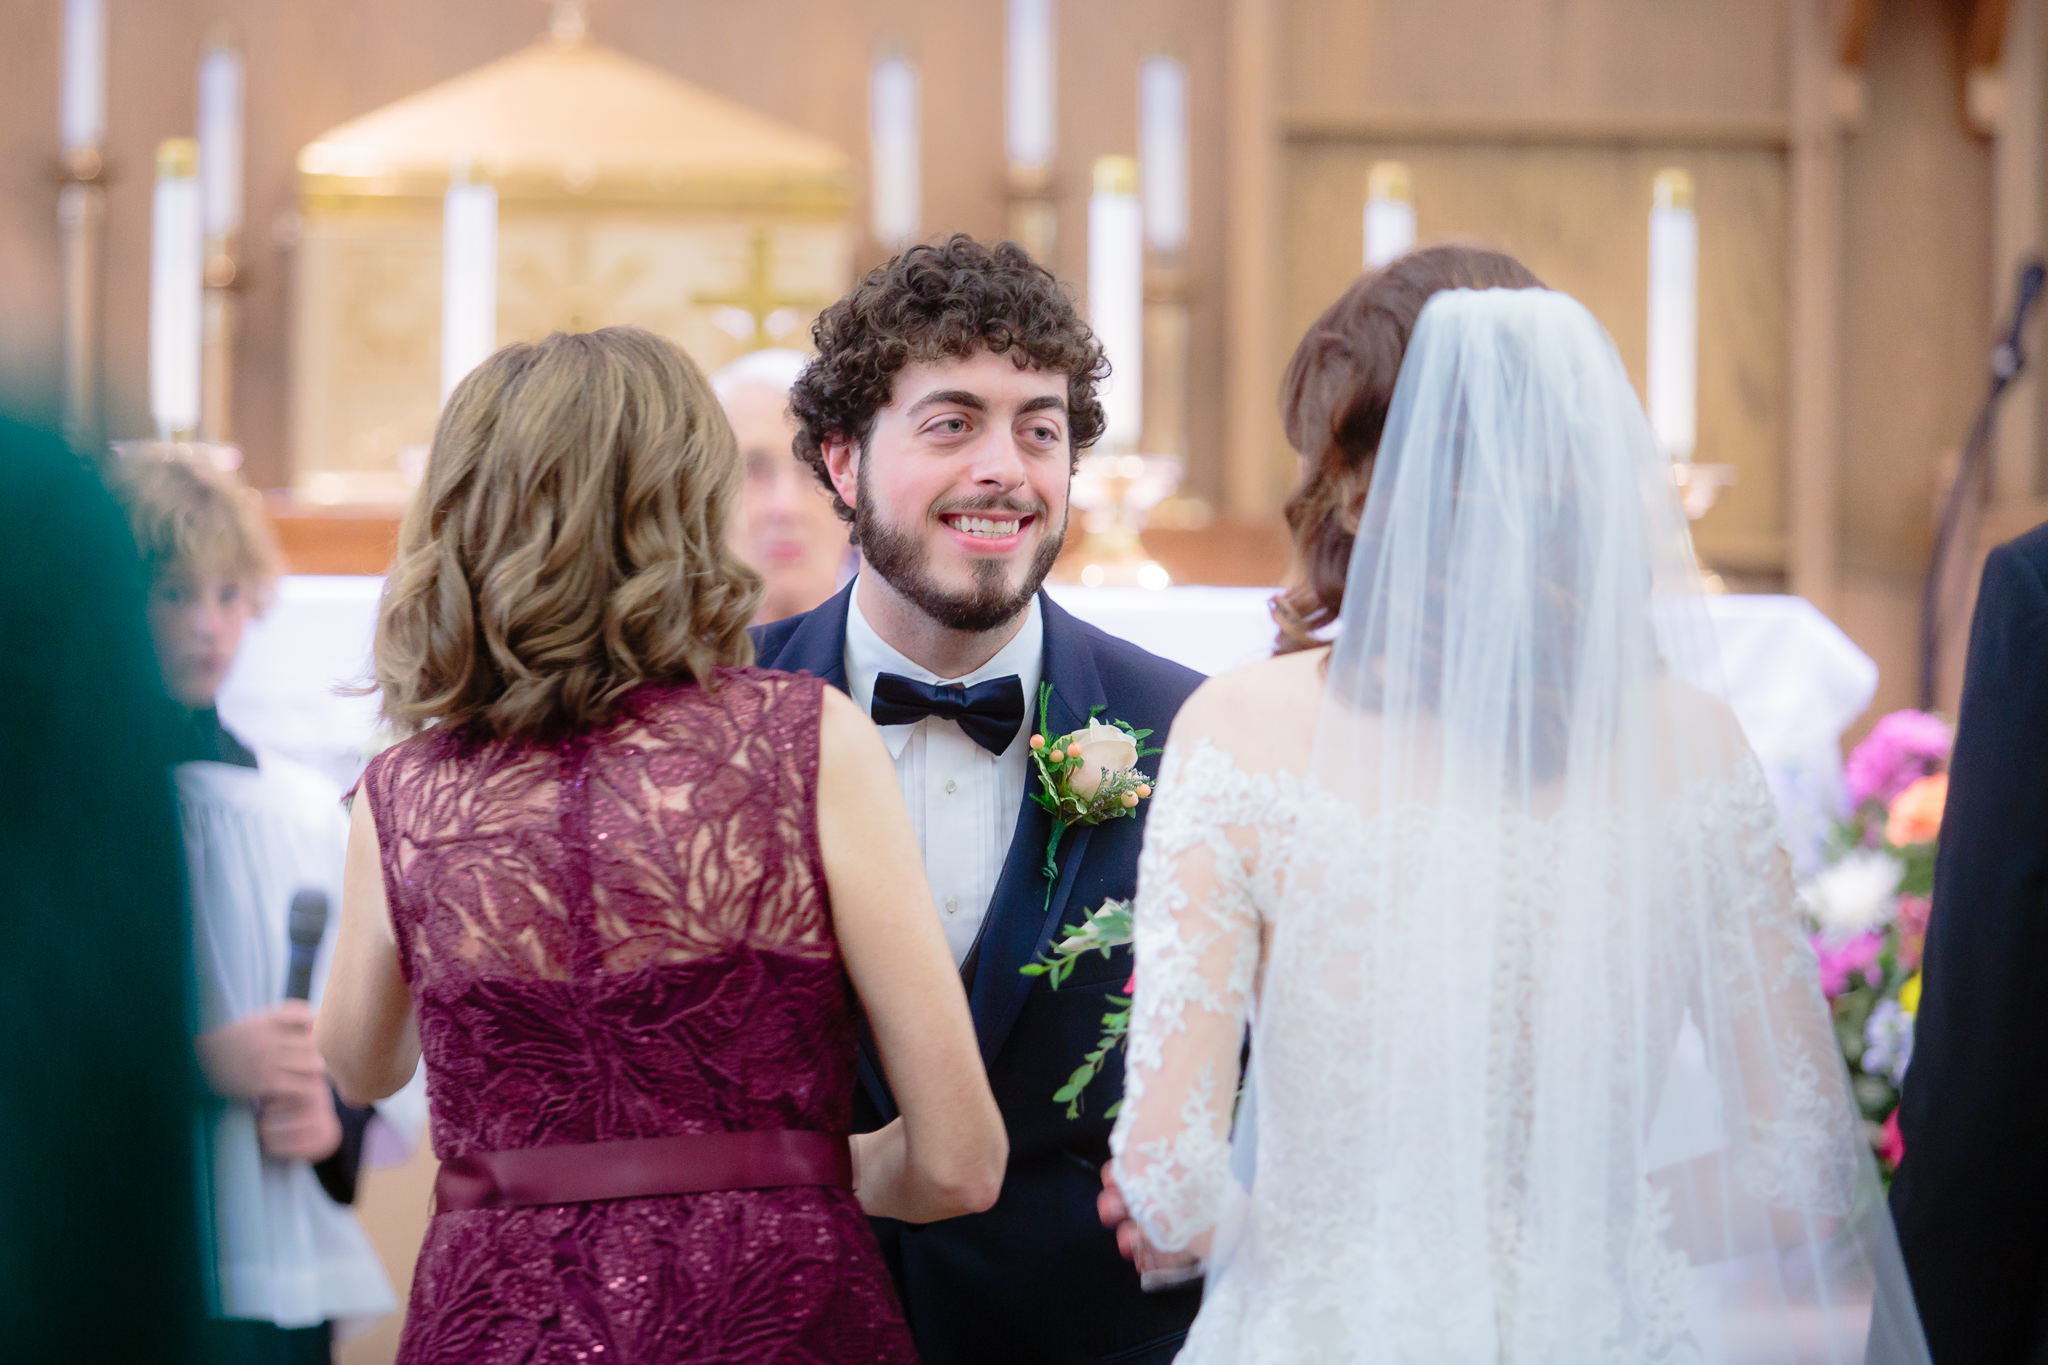 Groom smiles as his bride is presented to him at Saint Monica Parish